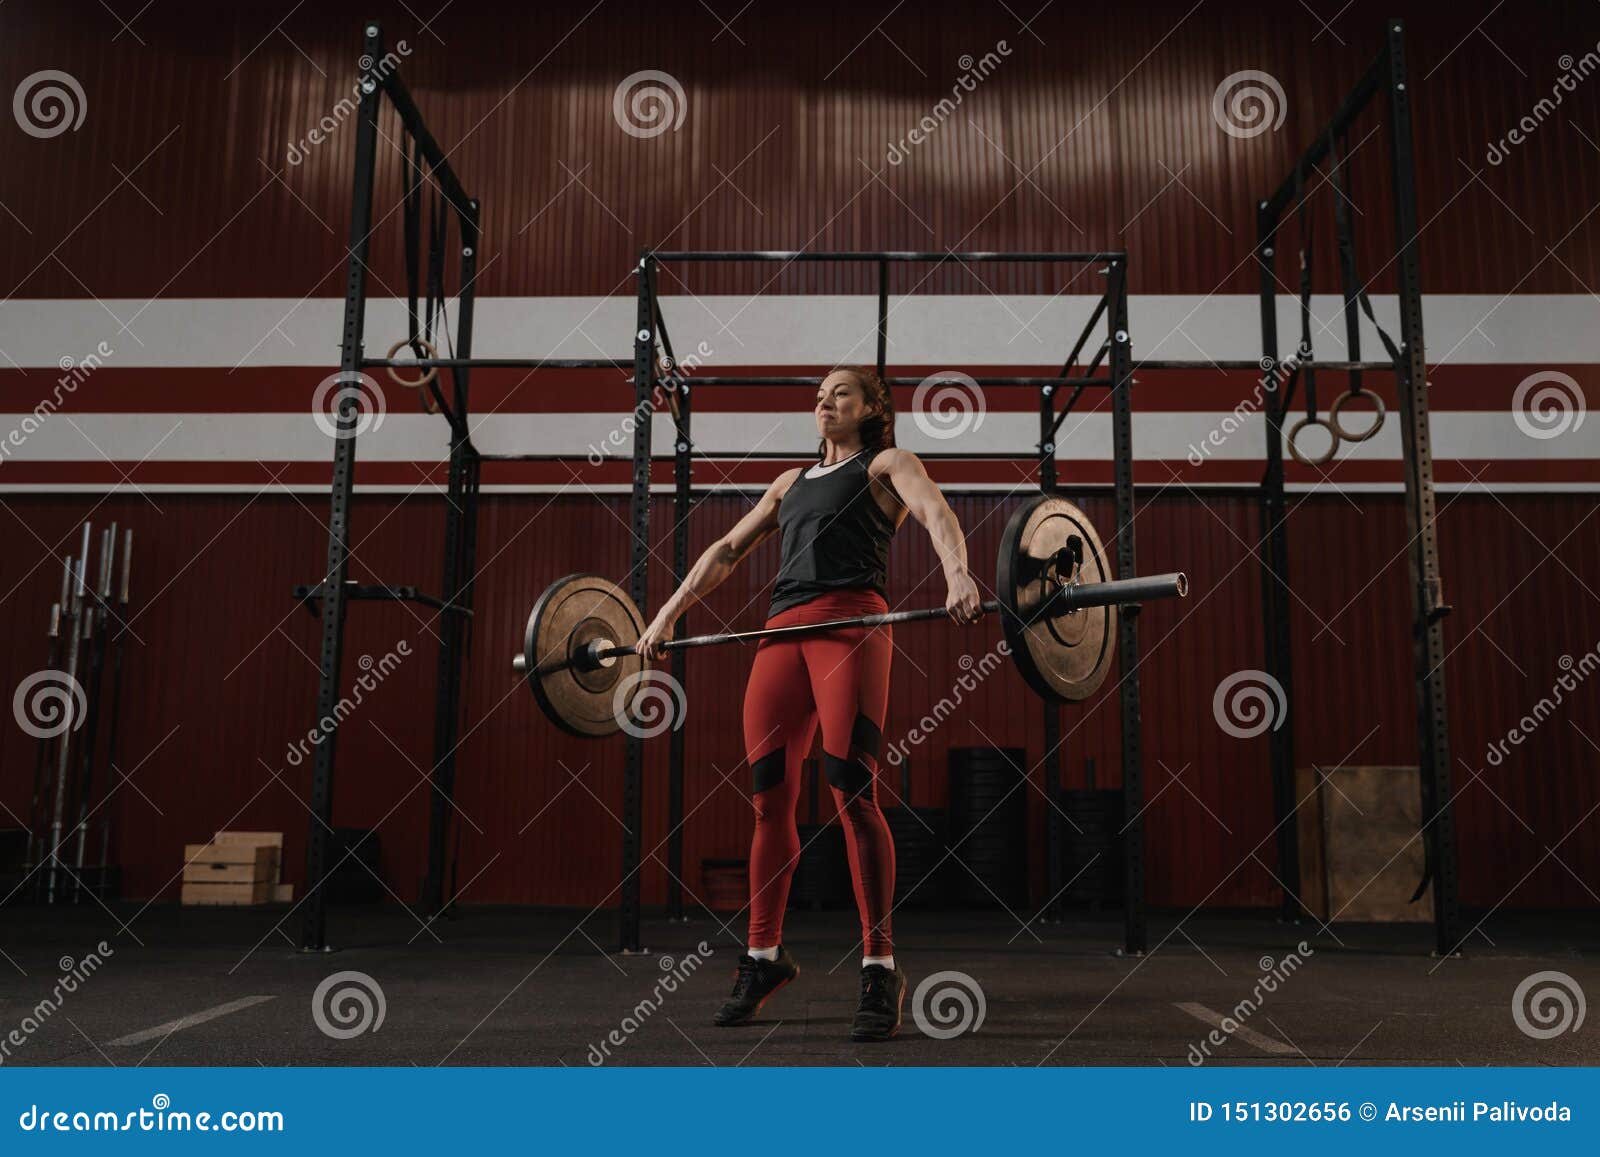 Crossfit Woman Lifting Heavy Barbell at the Gym Stock Photo - Image of ...